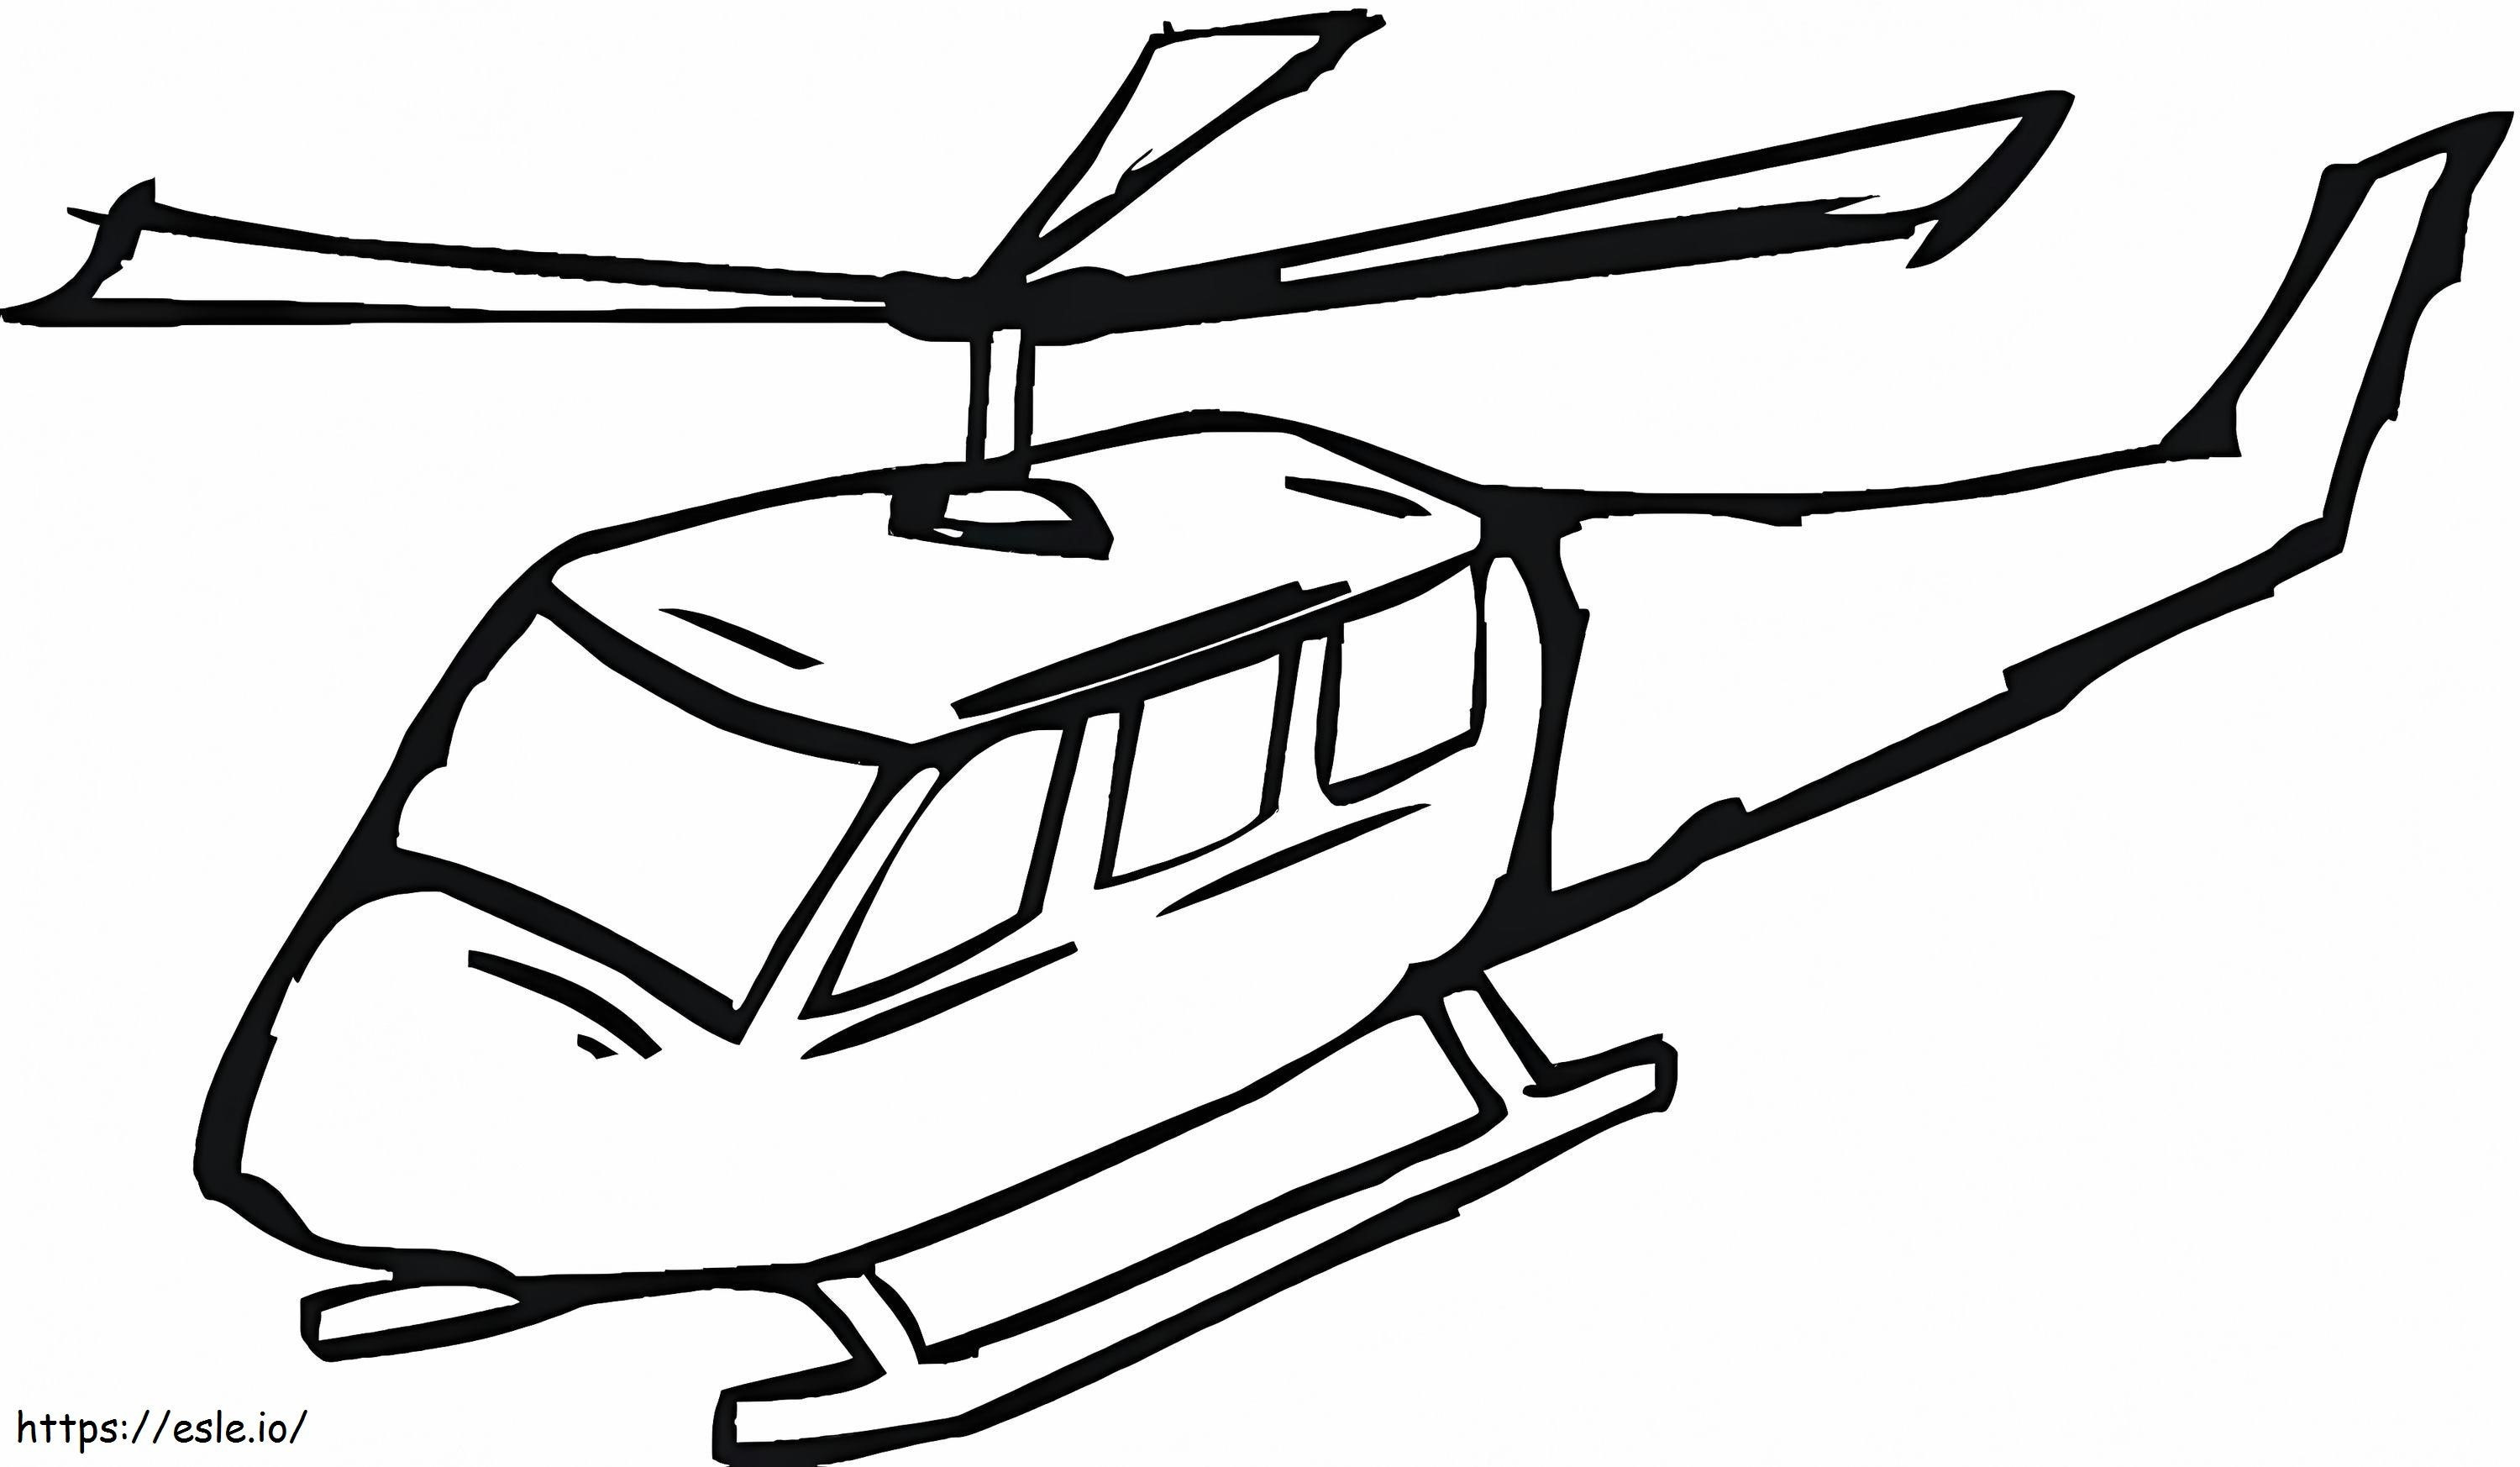 Helicopter For Children coloring page